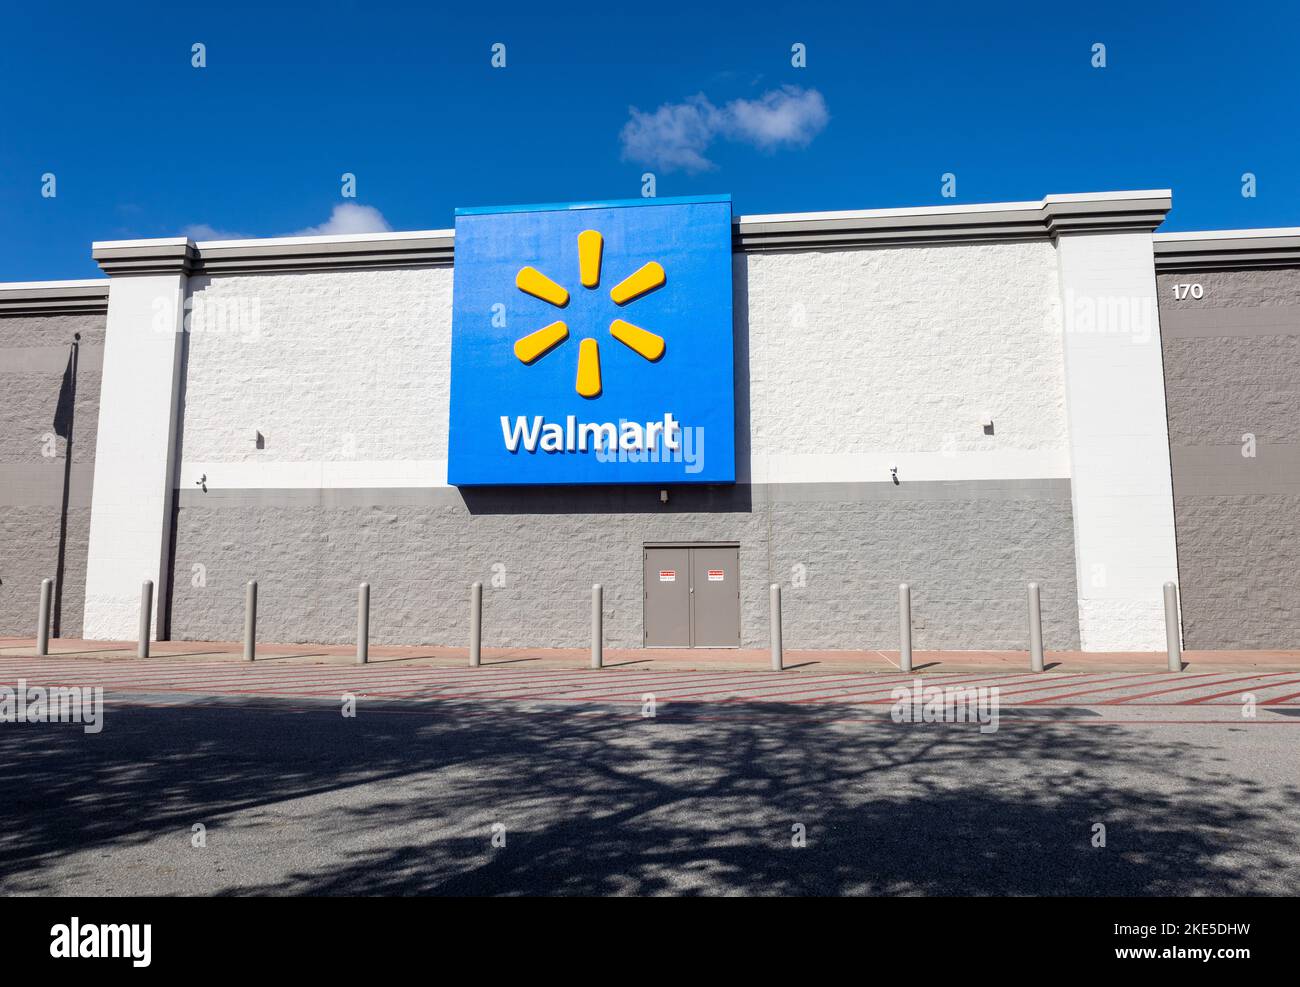 Walmart Superstore Gulf Shores Alabama Corporate Logo On The Exterior Of The Store Stock Photo